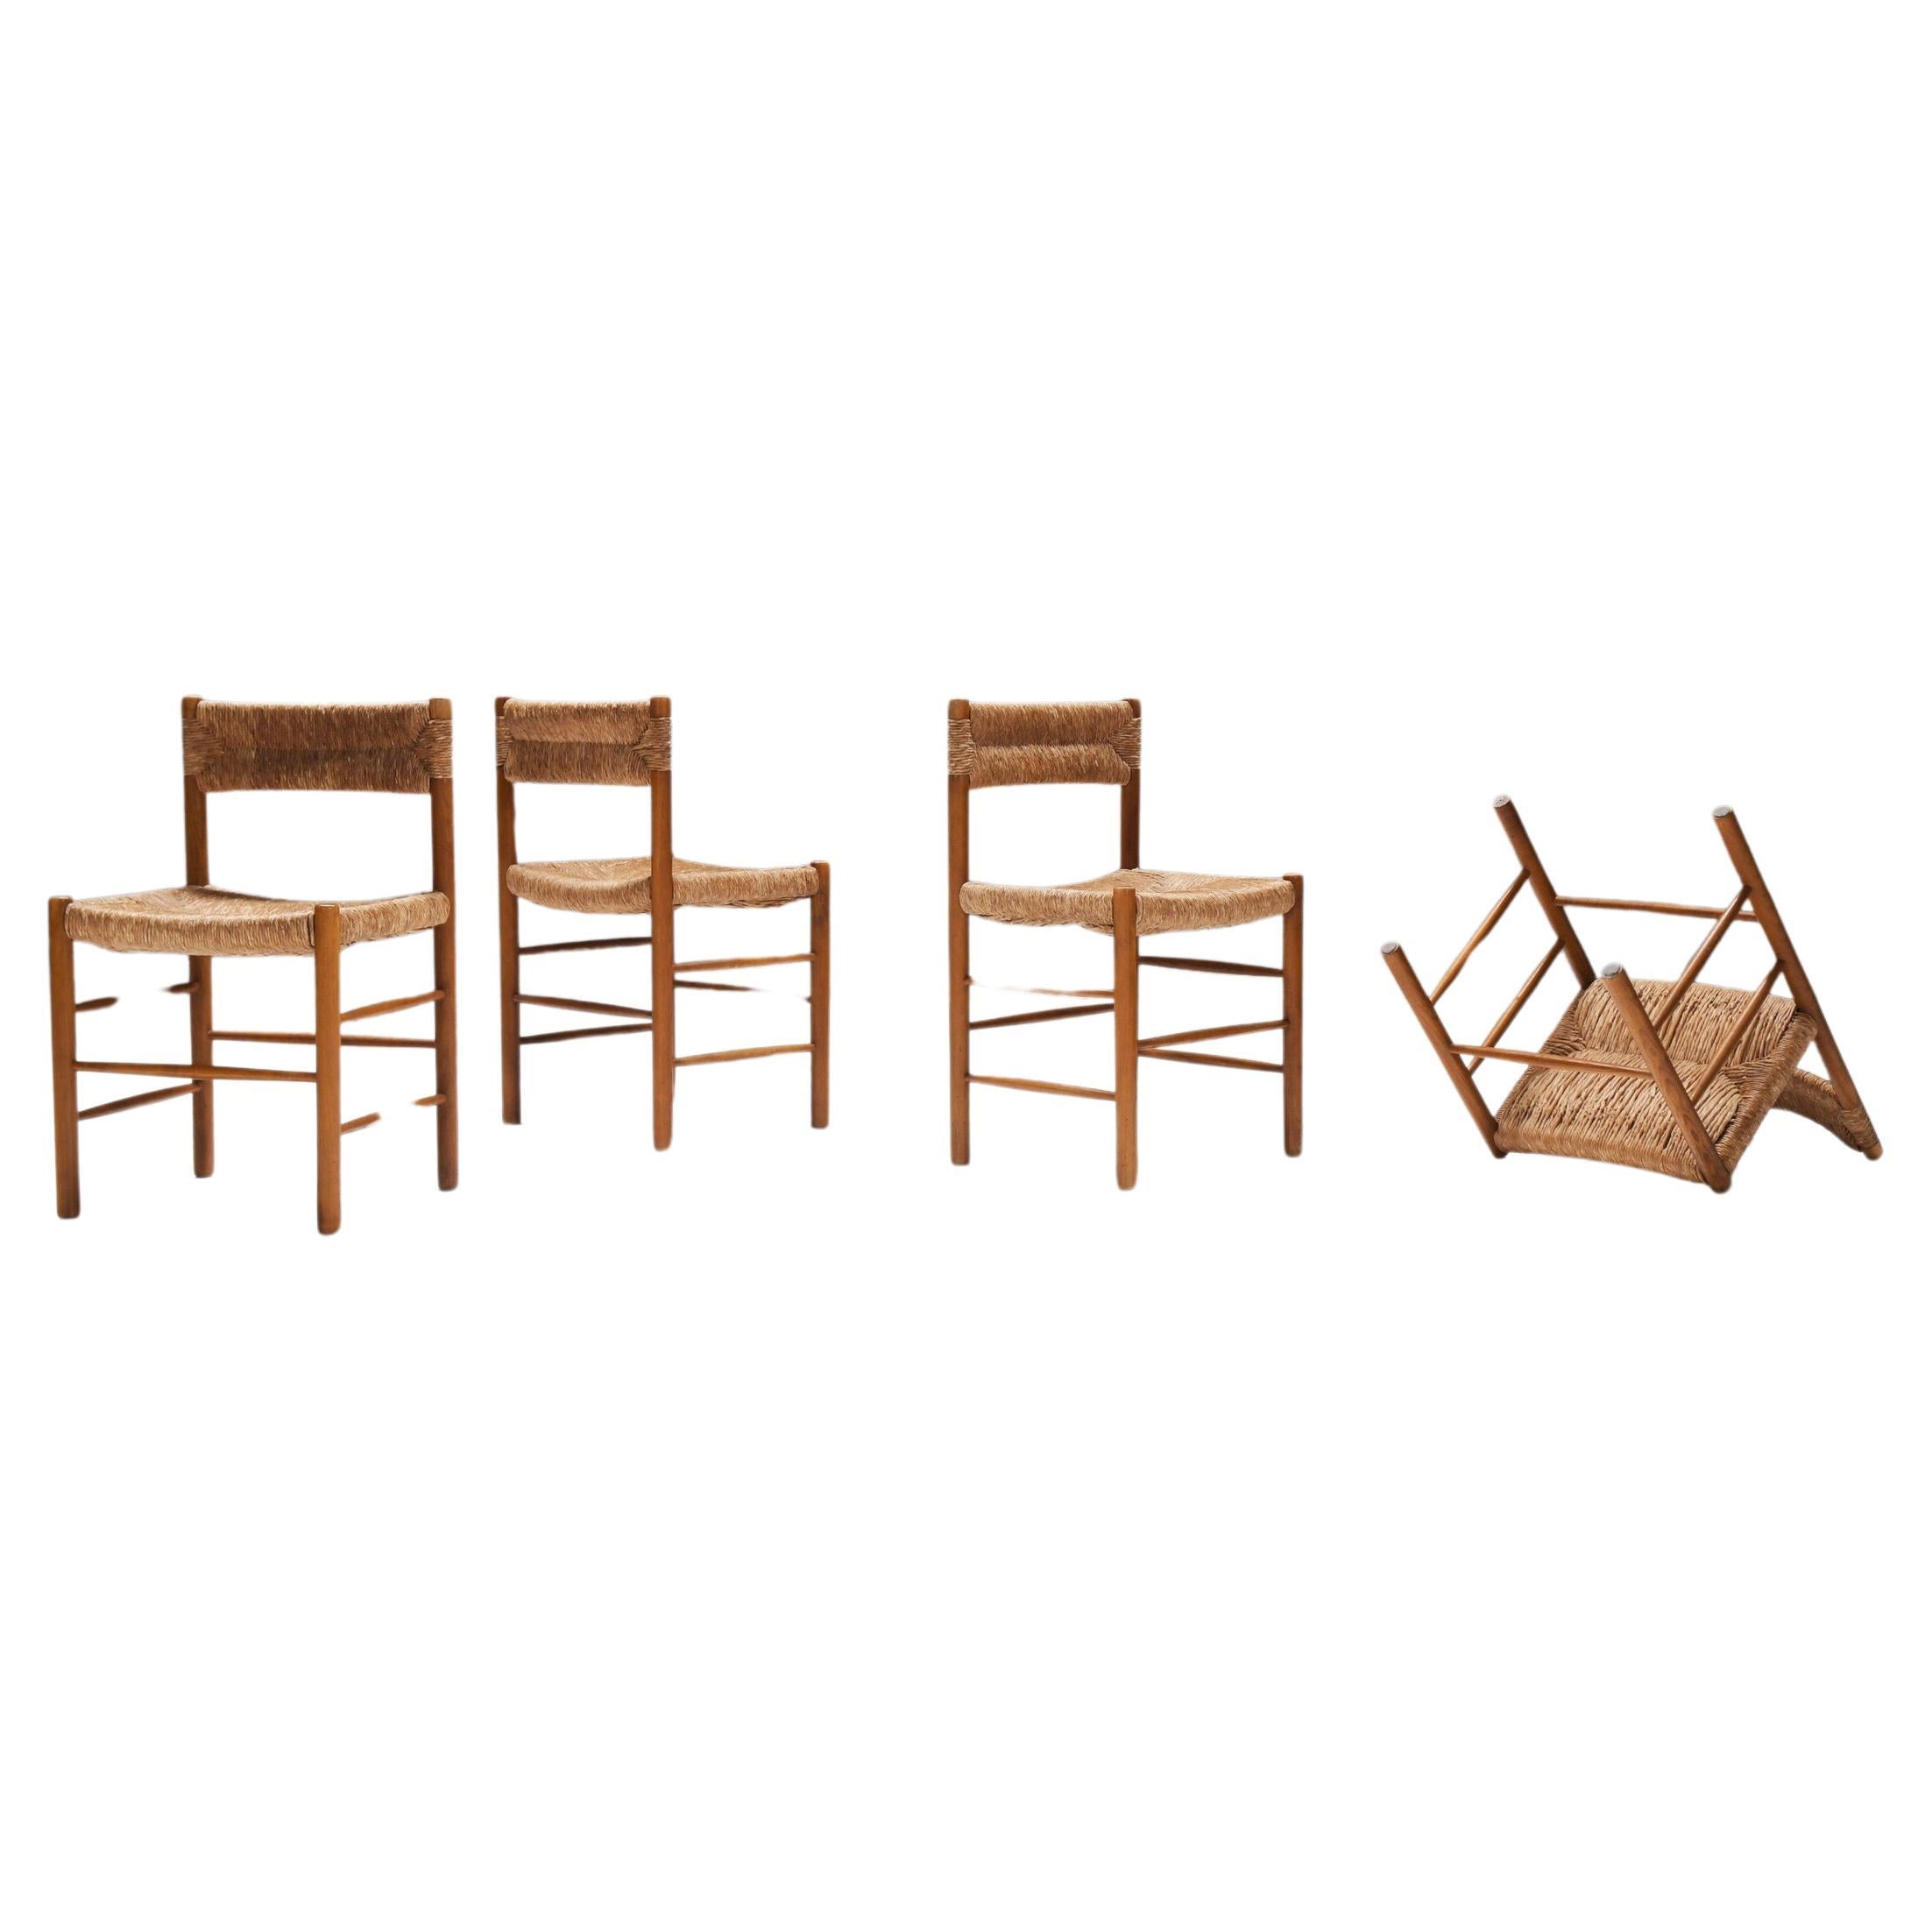 Great Dordogne dining chairs by Charlotte Perriand /Robert Sentou - France